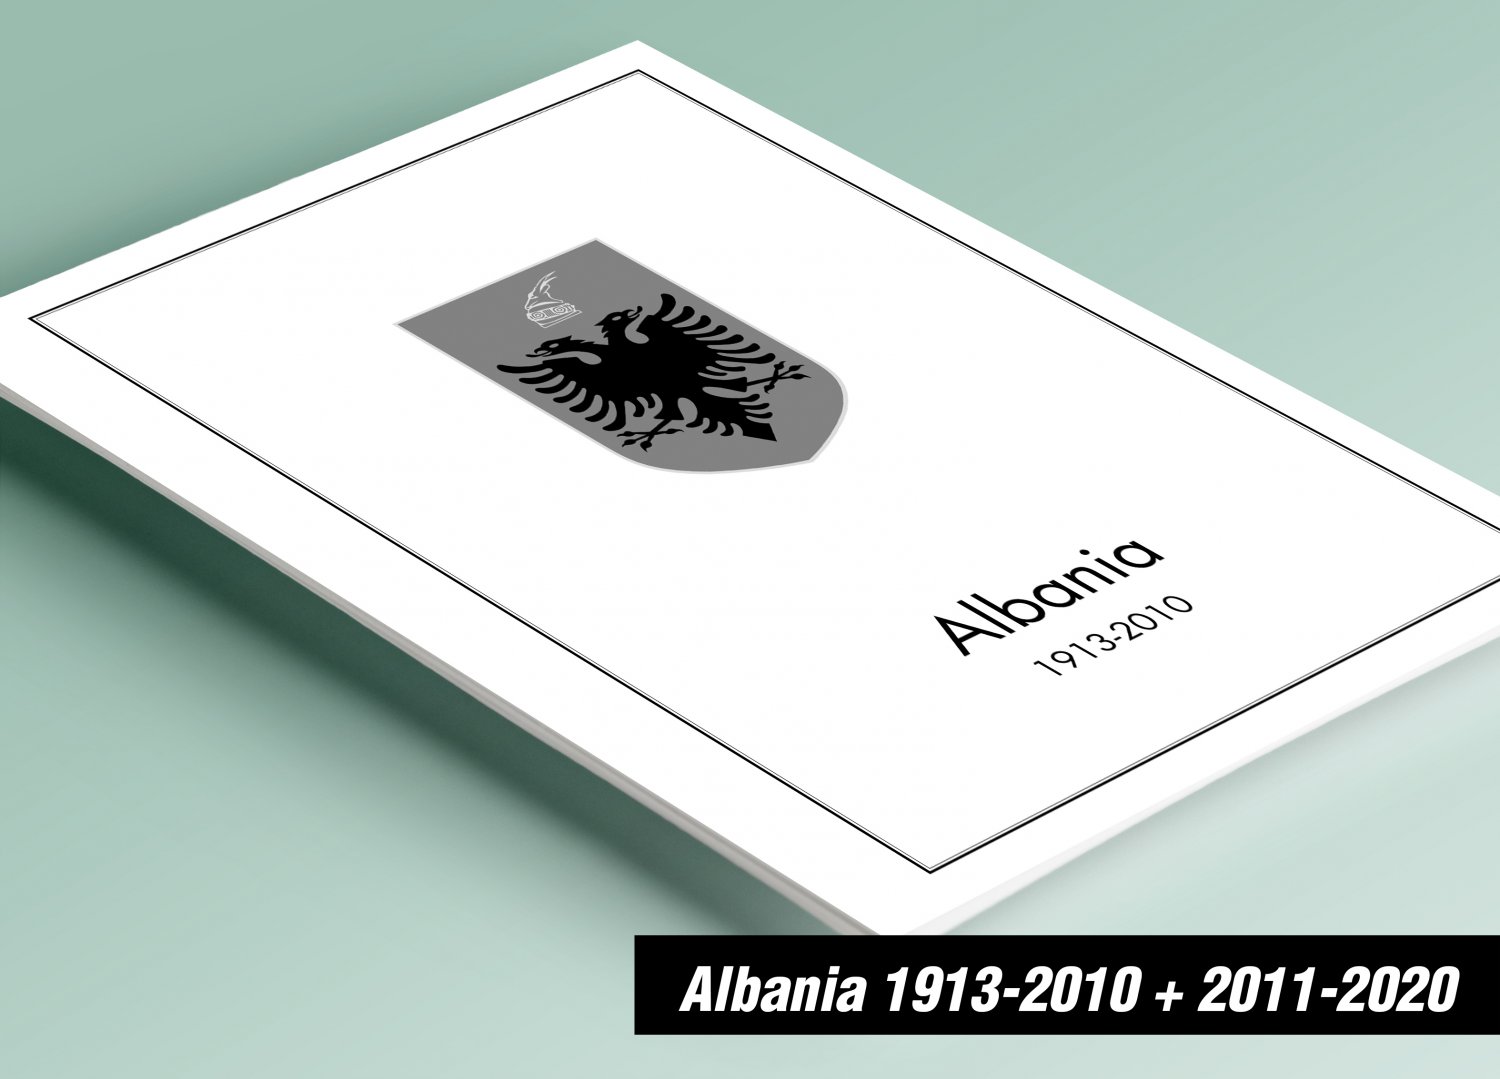 PRINTED ALBANIA 1913-2010 + 2011-2020 STAMP ALBUM PAGES (432 pages)